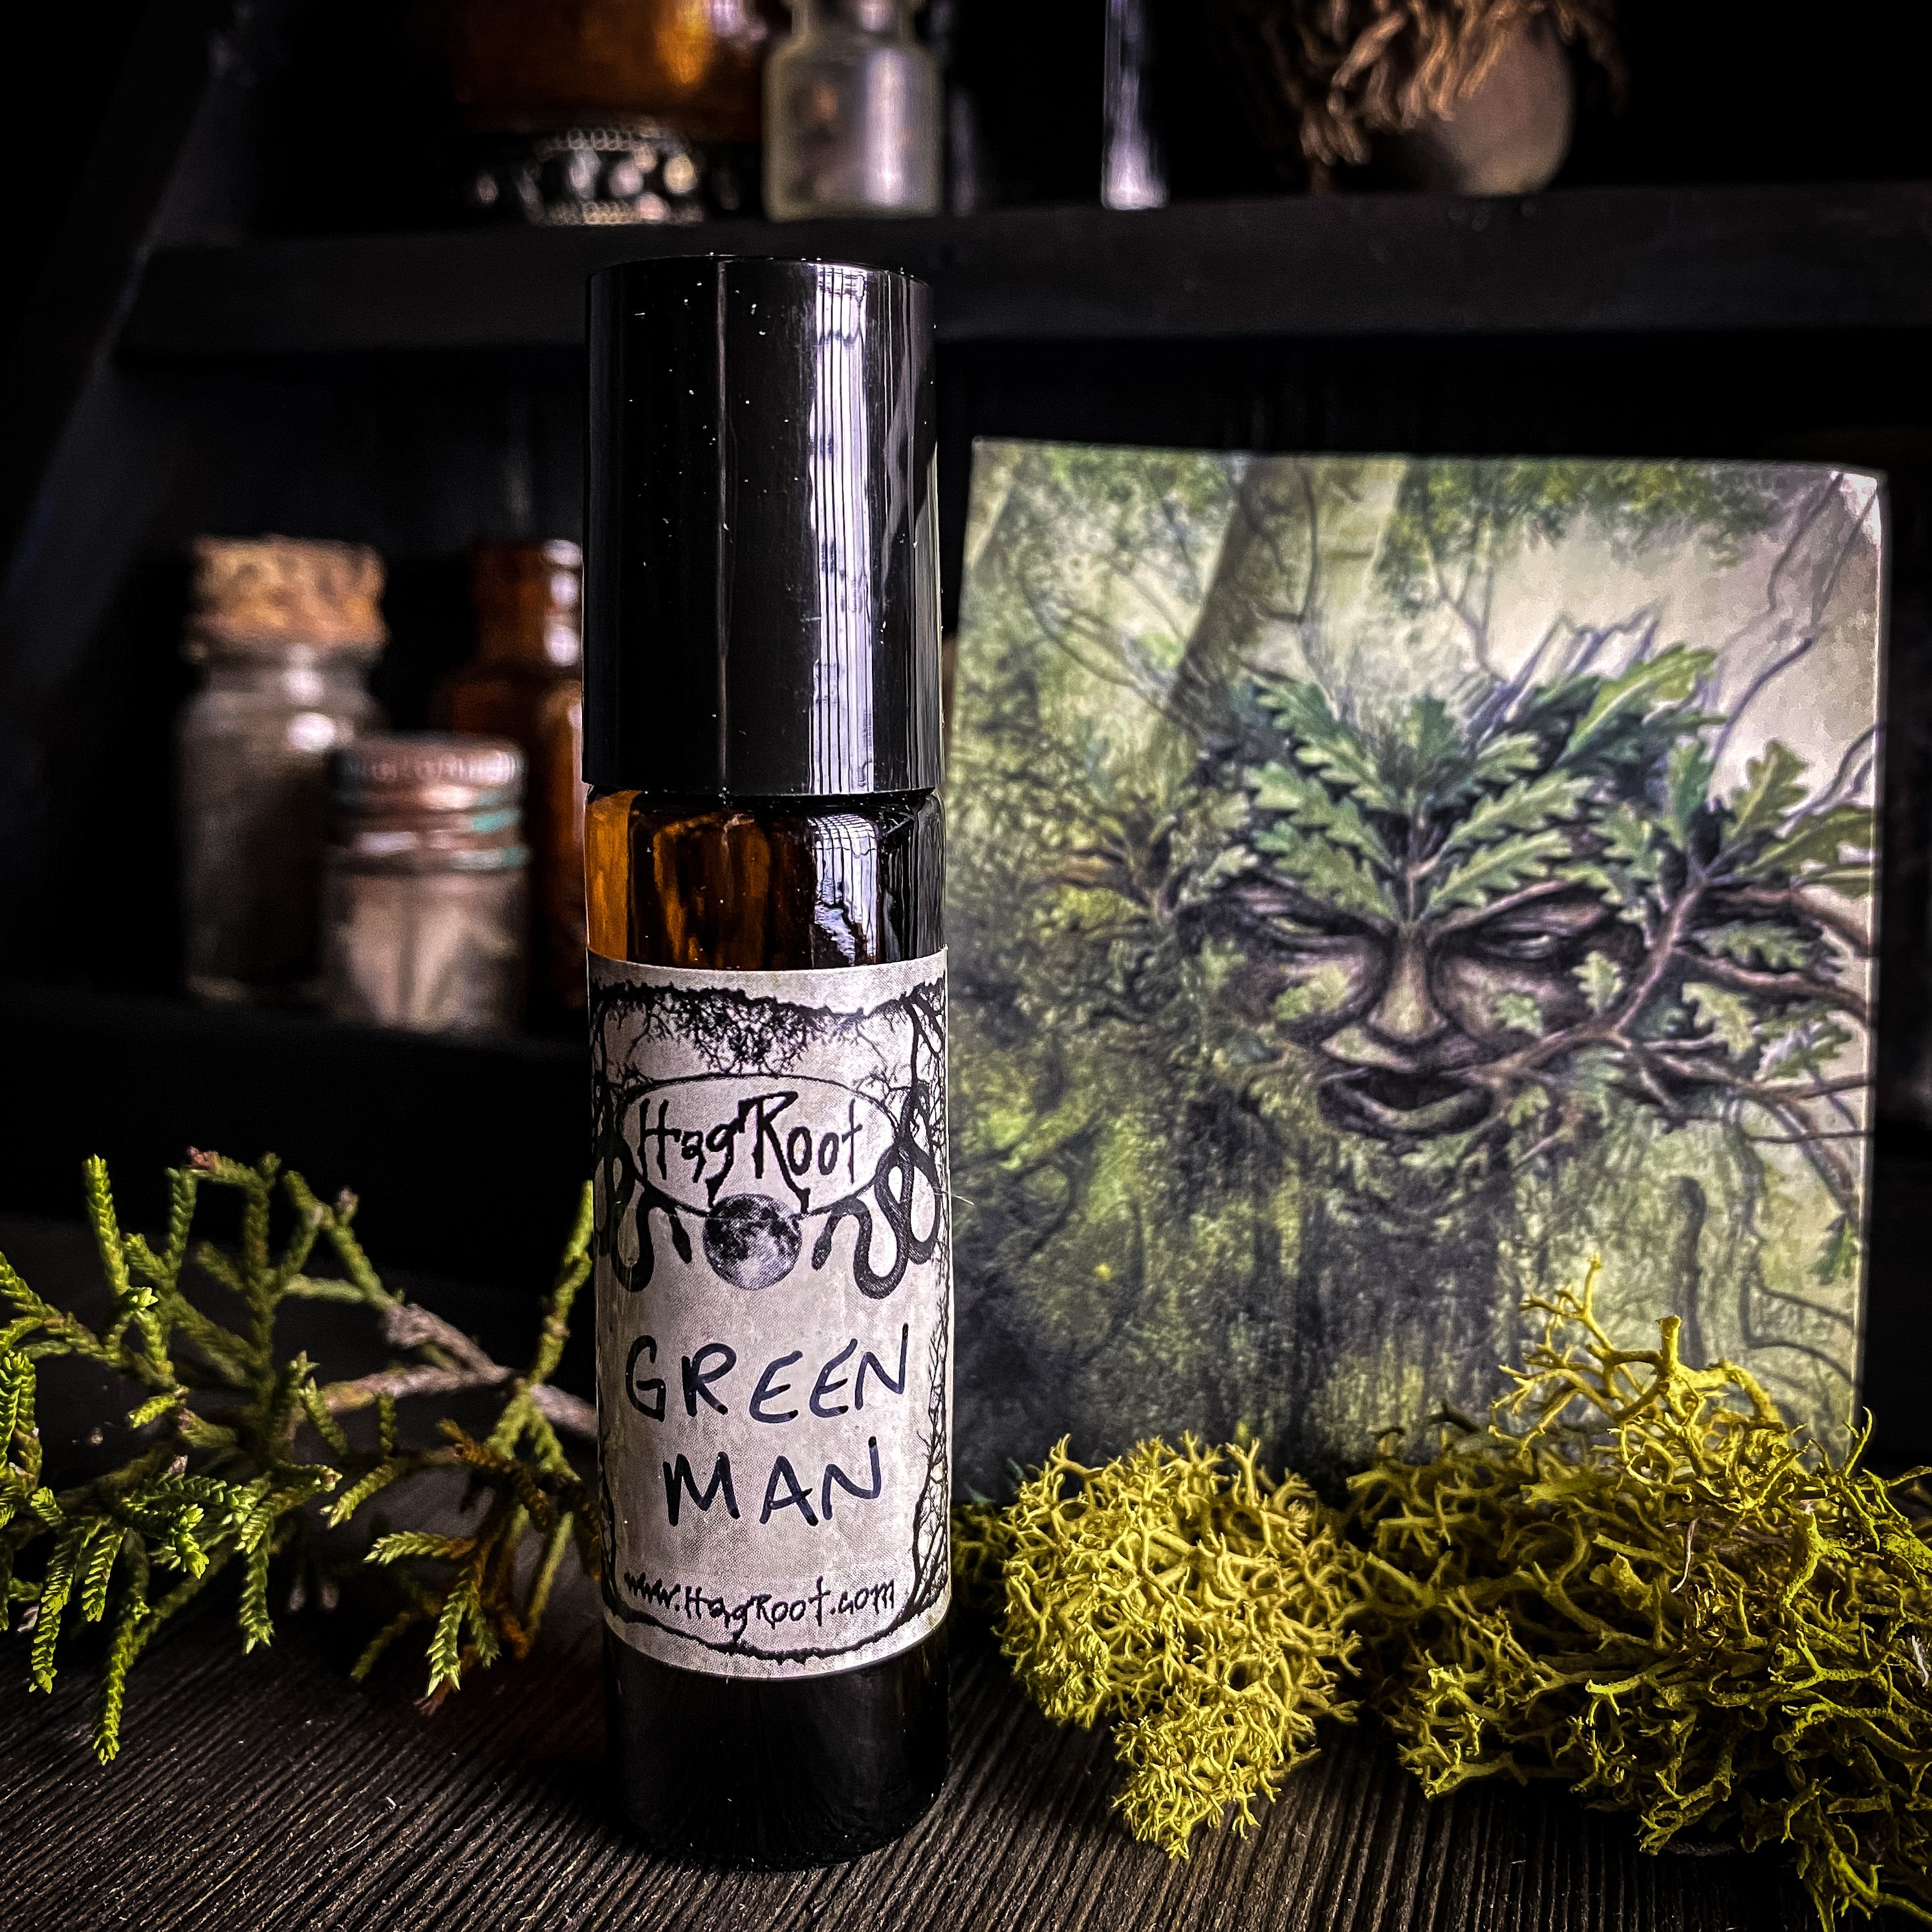 GREEN MAN-(Vetiver, Grass, Cedar, Peppercorn, Patchouli)-Perfume, Cologne, Anointing, Ritual Oil